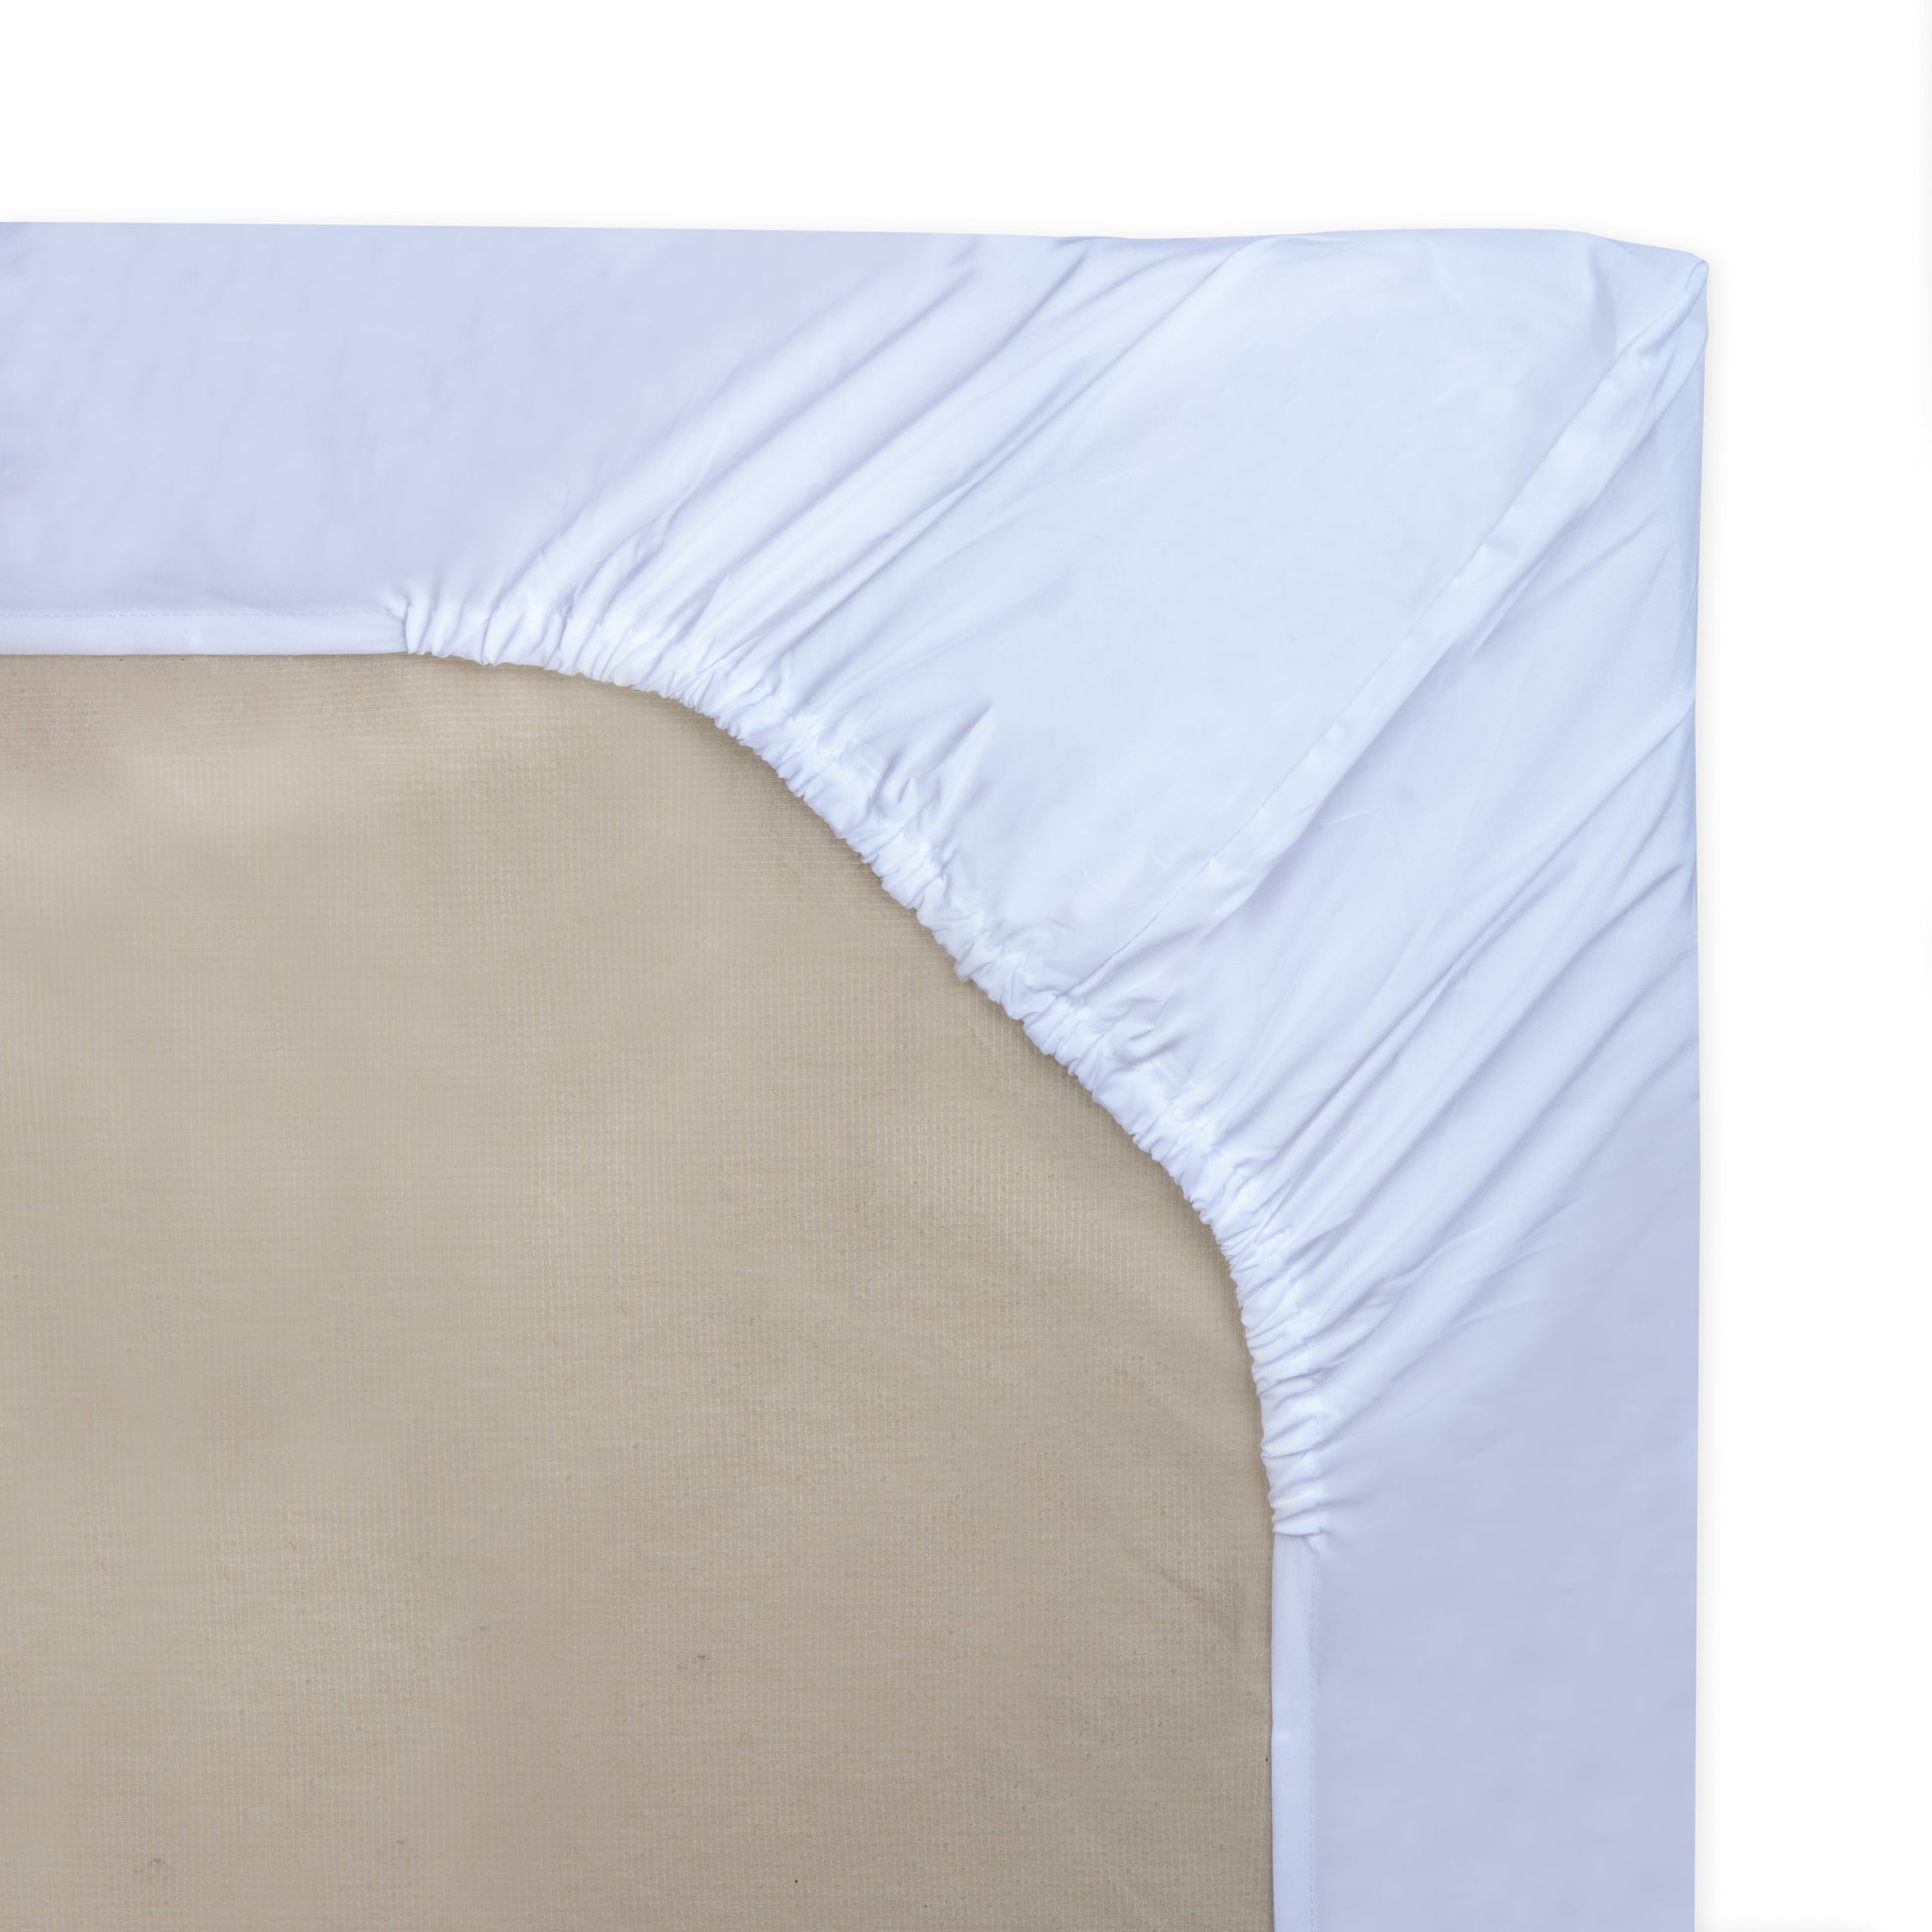 American Dawn | 39X75X12 Inch White Fitted Sheet